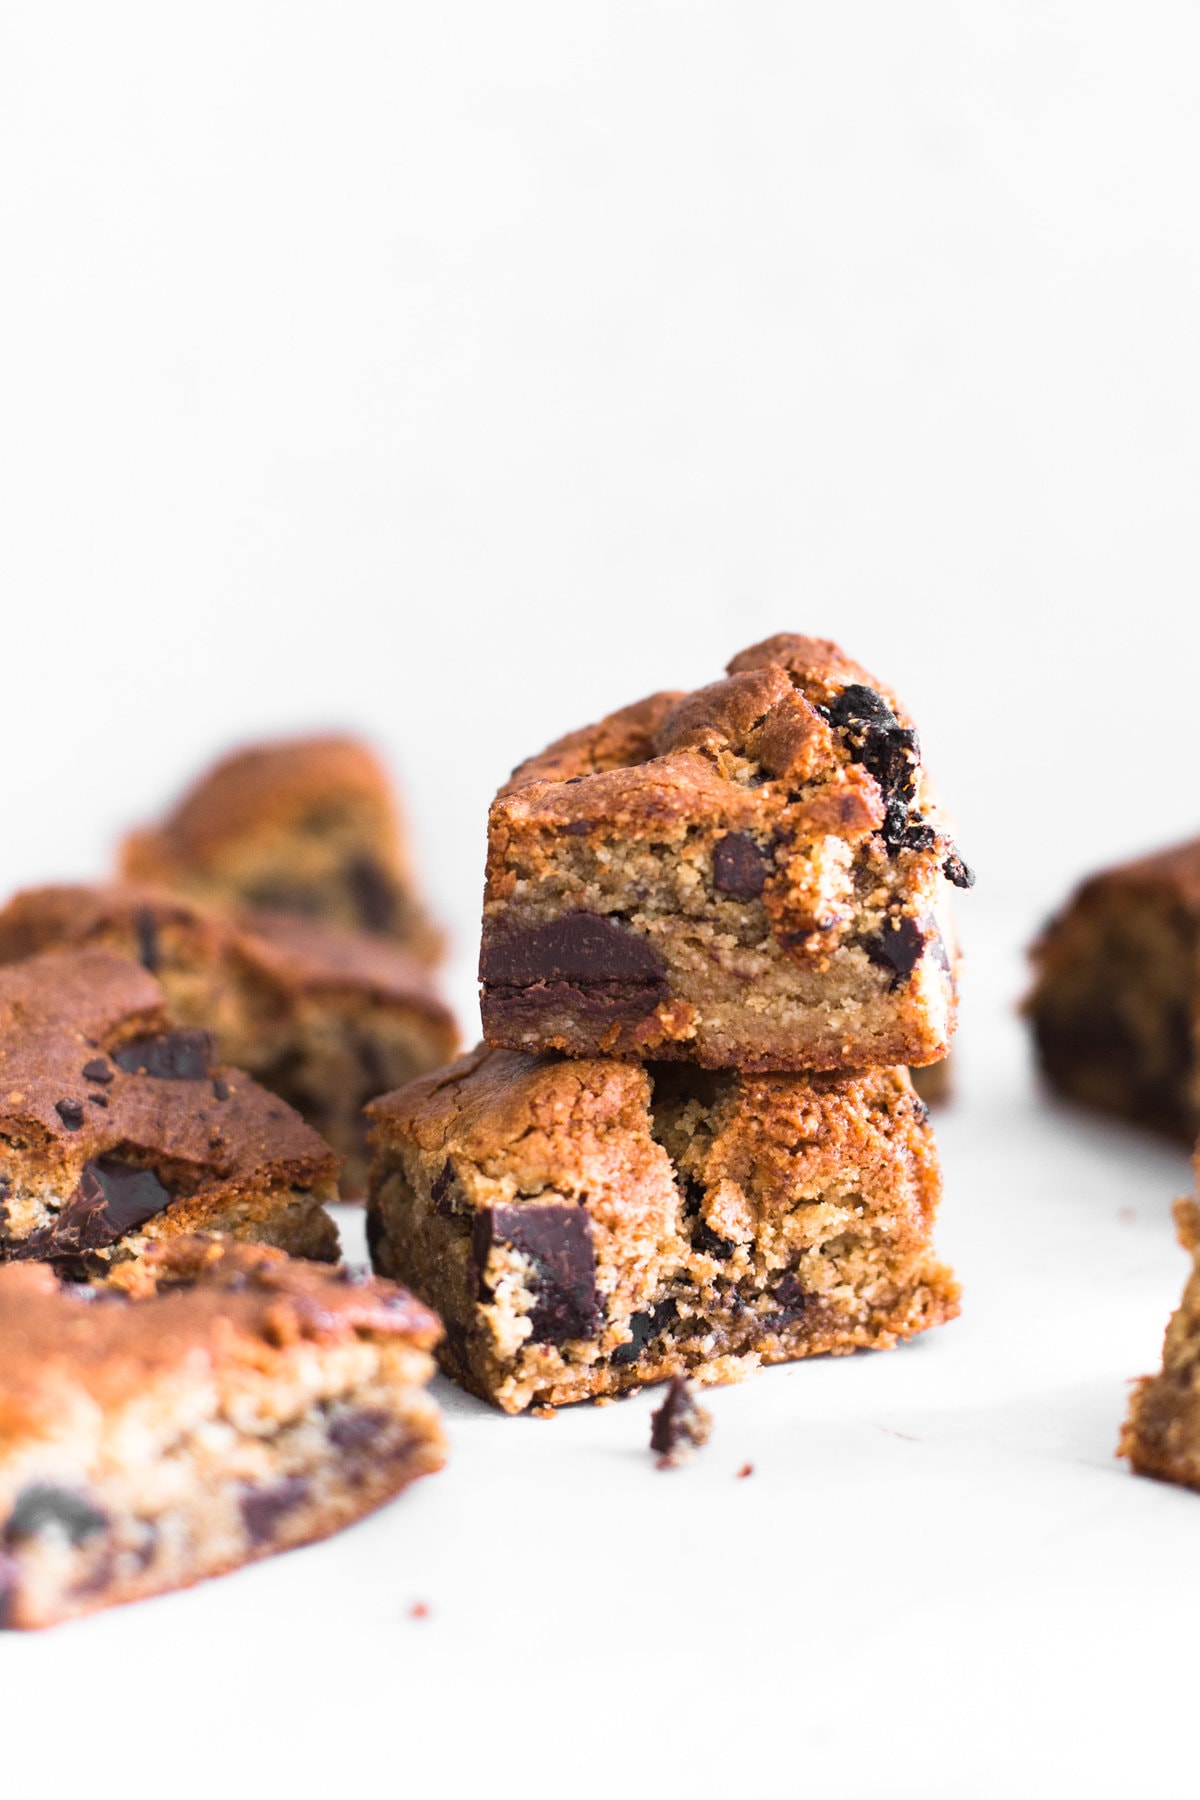 Sweet meets salty in these Vegan Miso Chocolate Chip Cookie Bars. Don't knock it till you try it! Ready in under an hour and 100% Gluten Free. #miso #glutenfree #chocolatechip #blondies #chocolatechunk #misochocolate #salty #baking #vegan #cookiebar #almonds #dairyfree